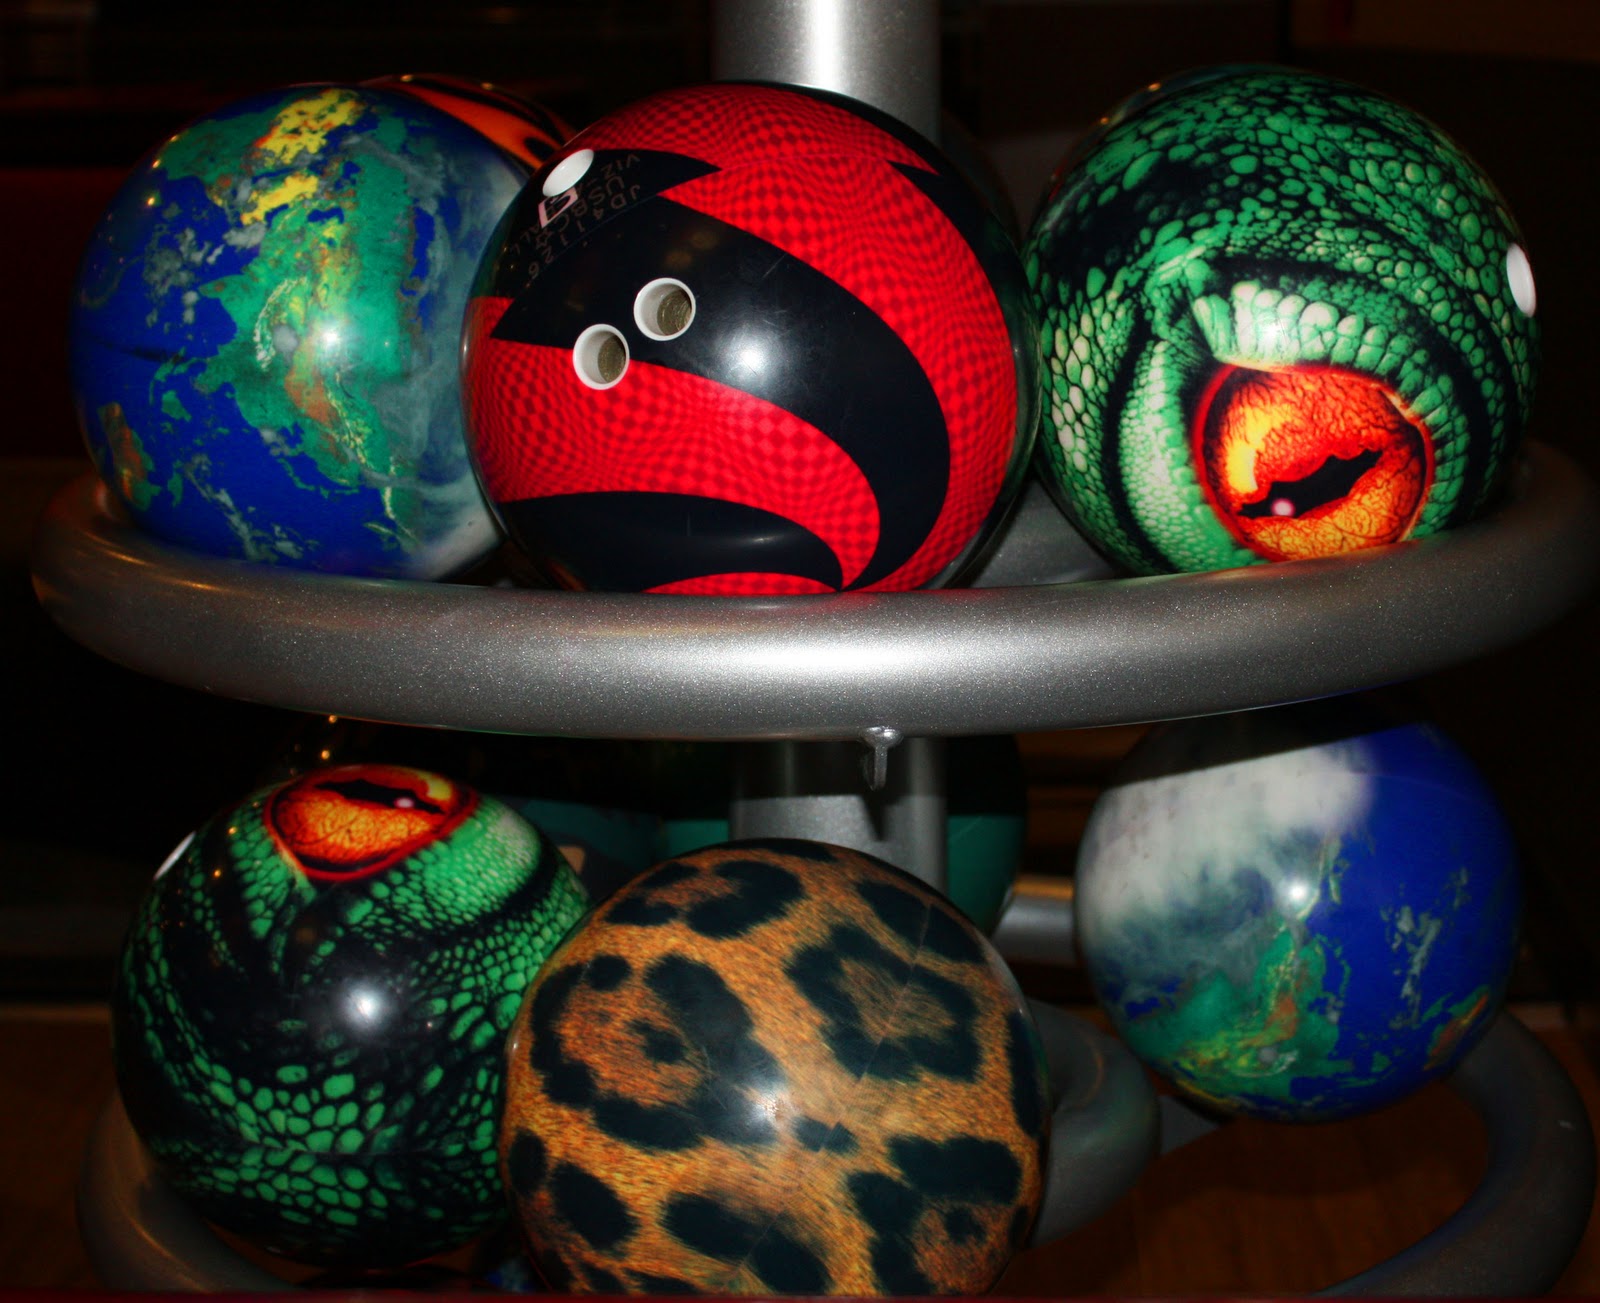 Boise Daily Photo When Did Bowling Balls Get So Artsy